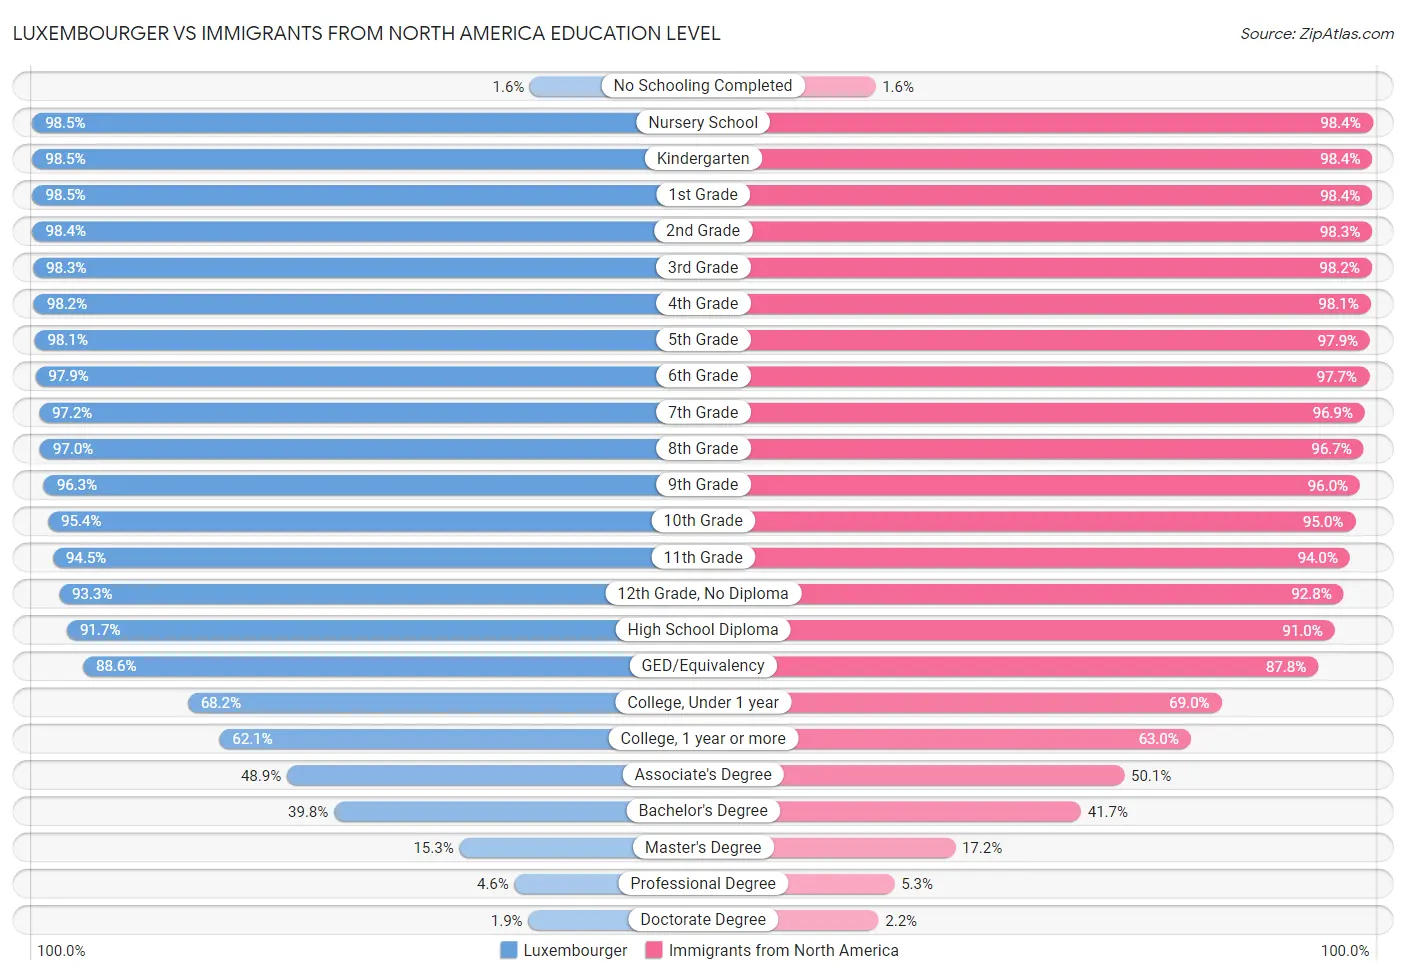 Luxembourger vs Immigrants from North America Education Level